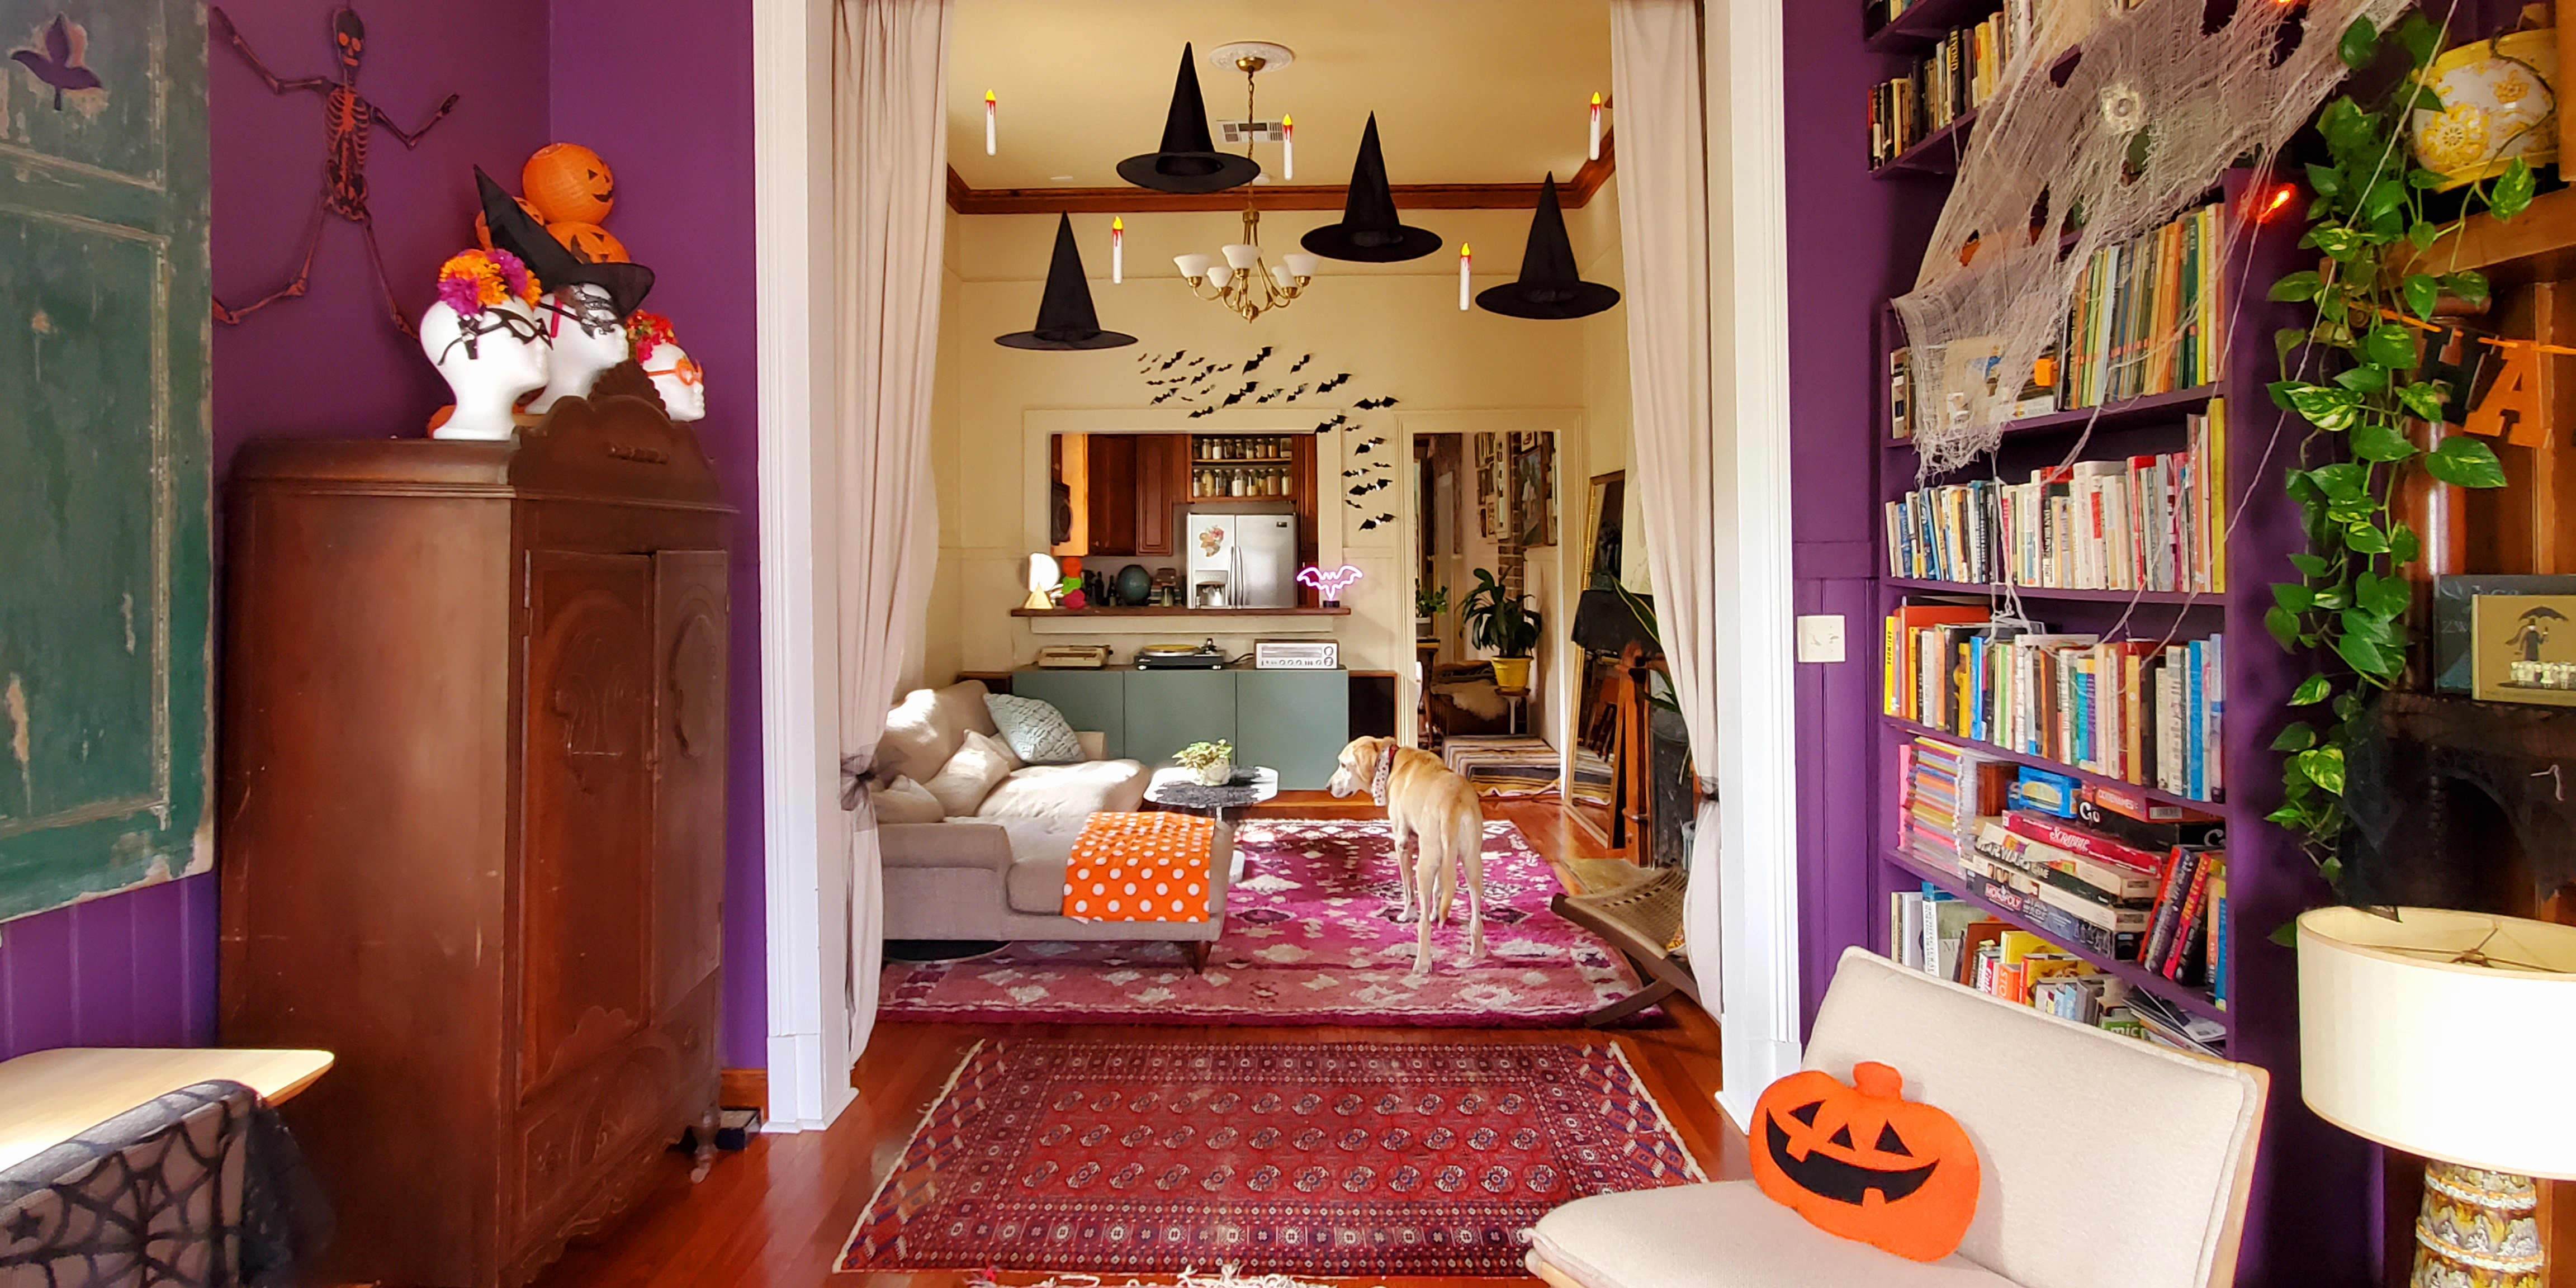 The Most Popular Halloween Decorations in 2022, According to ...